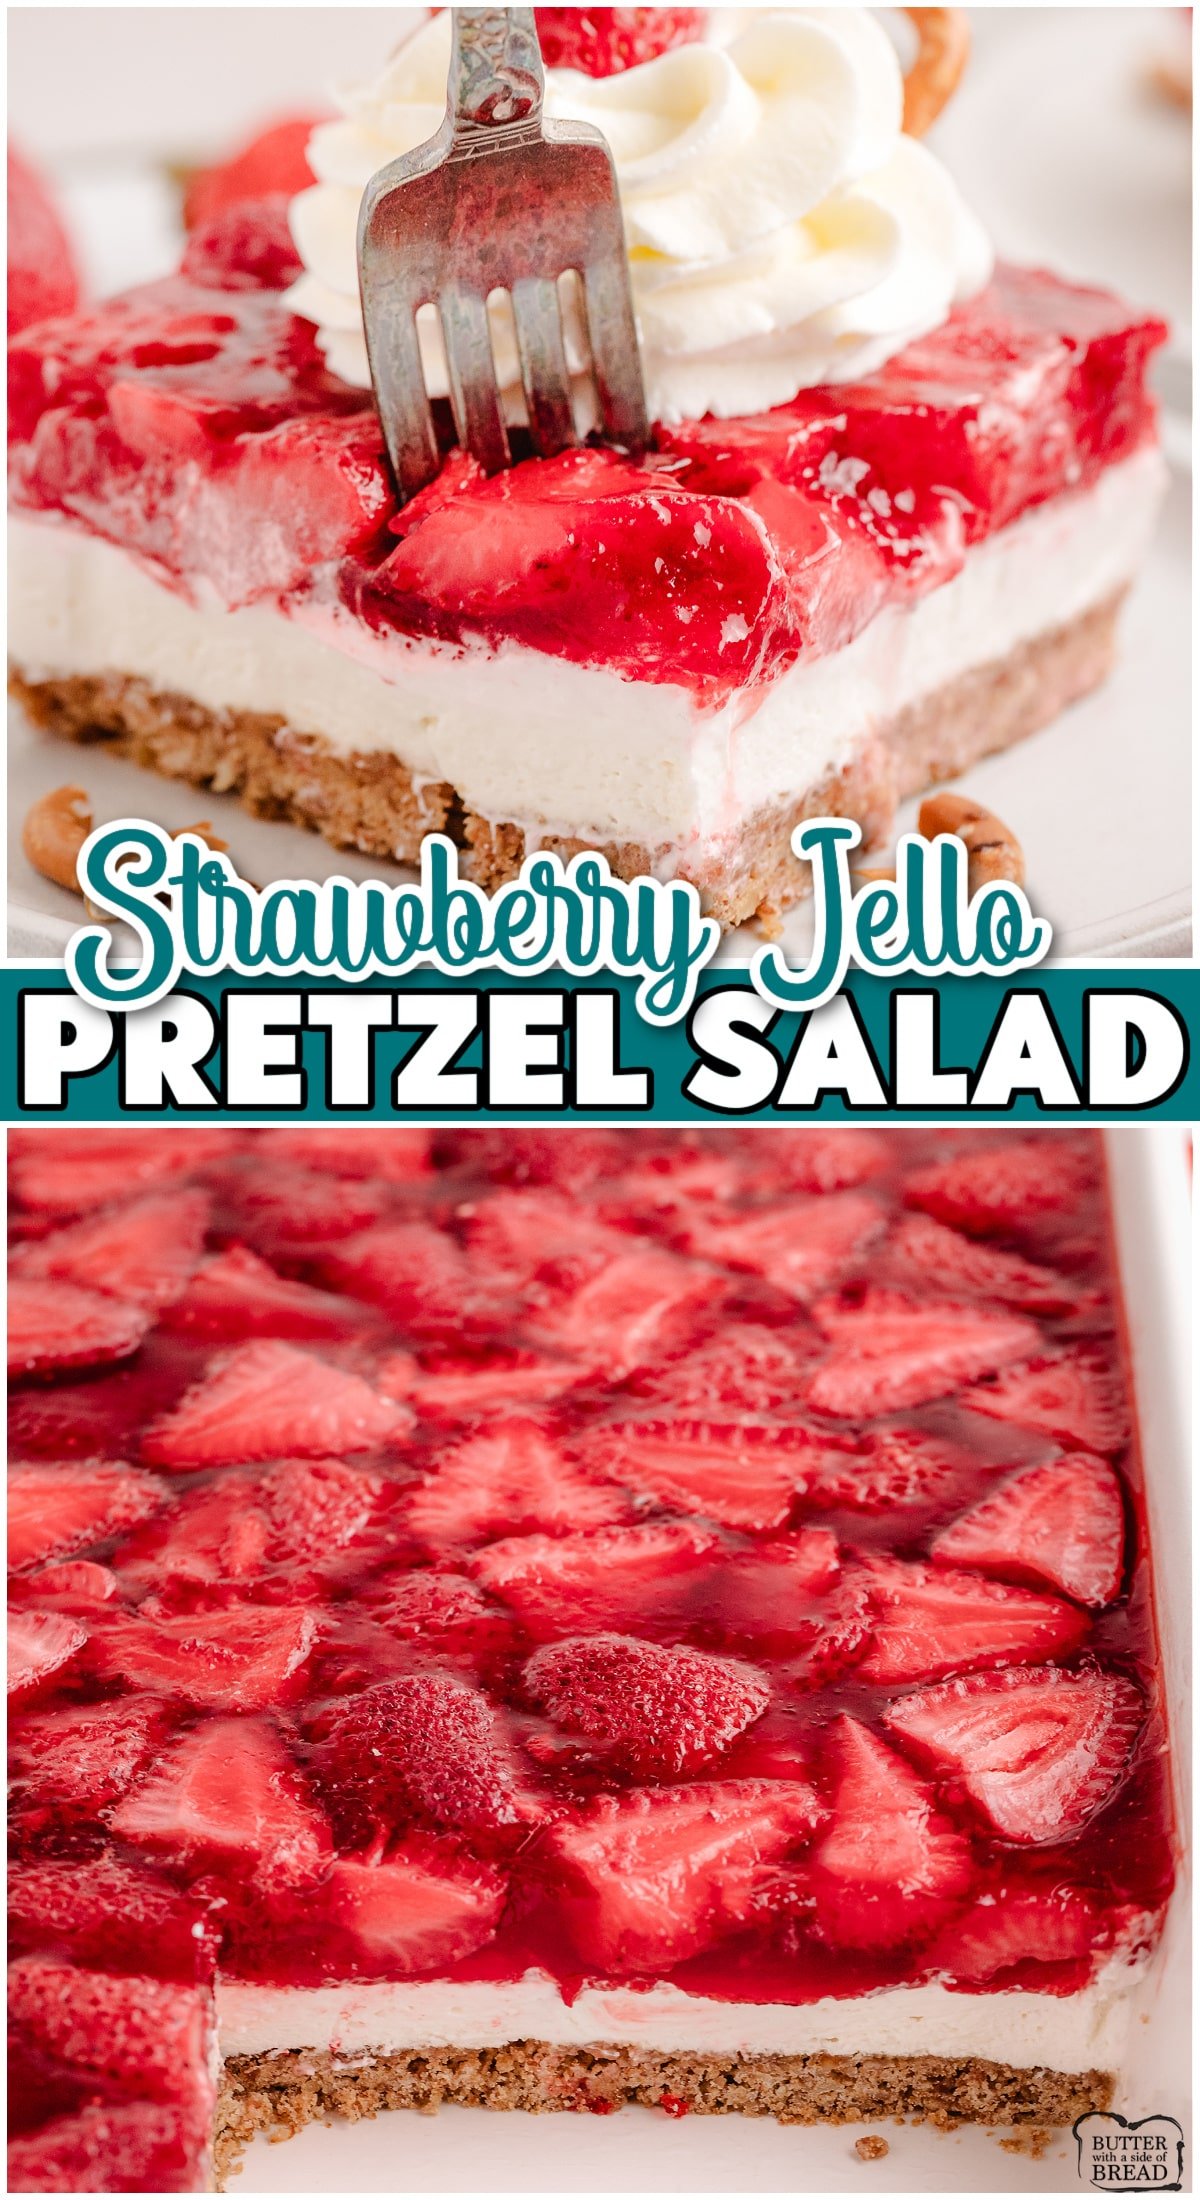 Strawberry Pretzel Salad layered with a buttery pretzel crust, cream cheese whipped topping, strawberries and jello. Strawberry Jello Salad that's gorgeous & simple sweet side dish that is always the first to go!